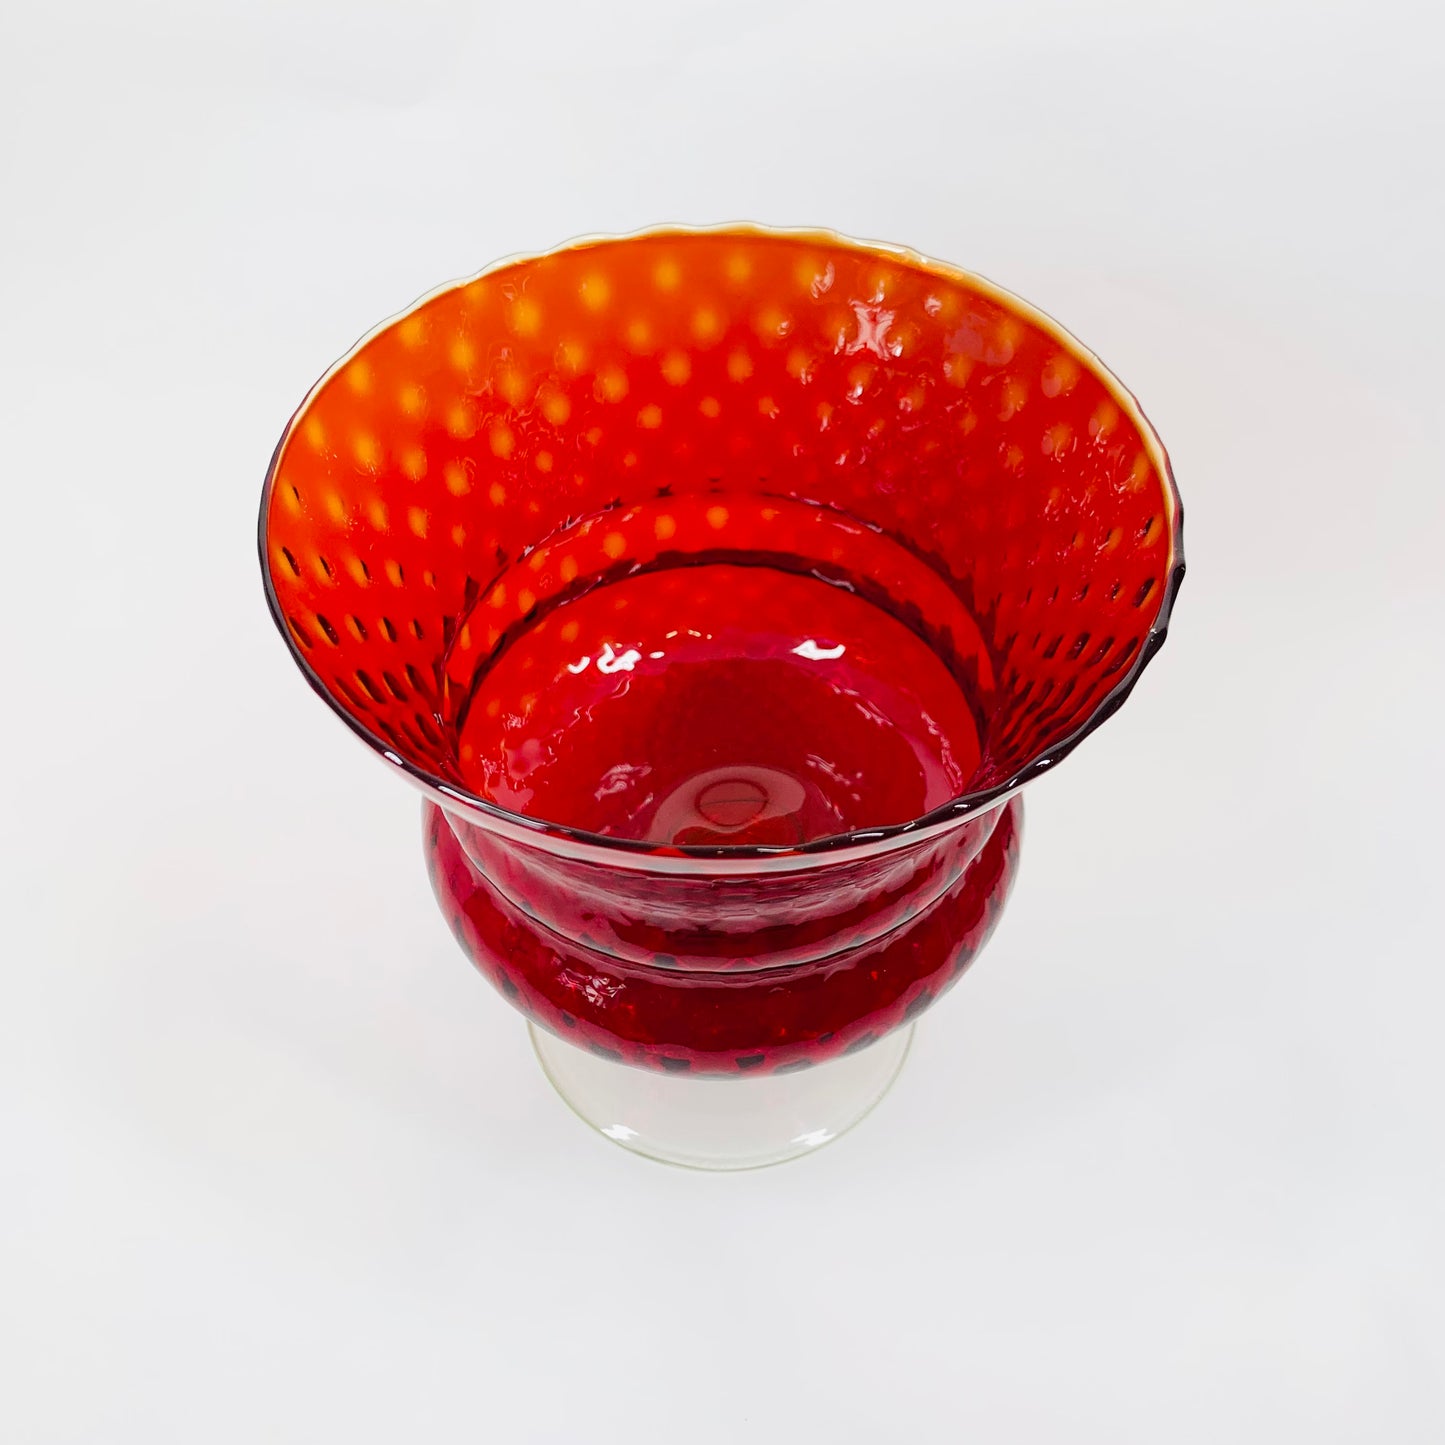 Midcentury Italian red orange strawberry glass comport with clear stem